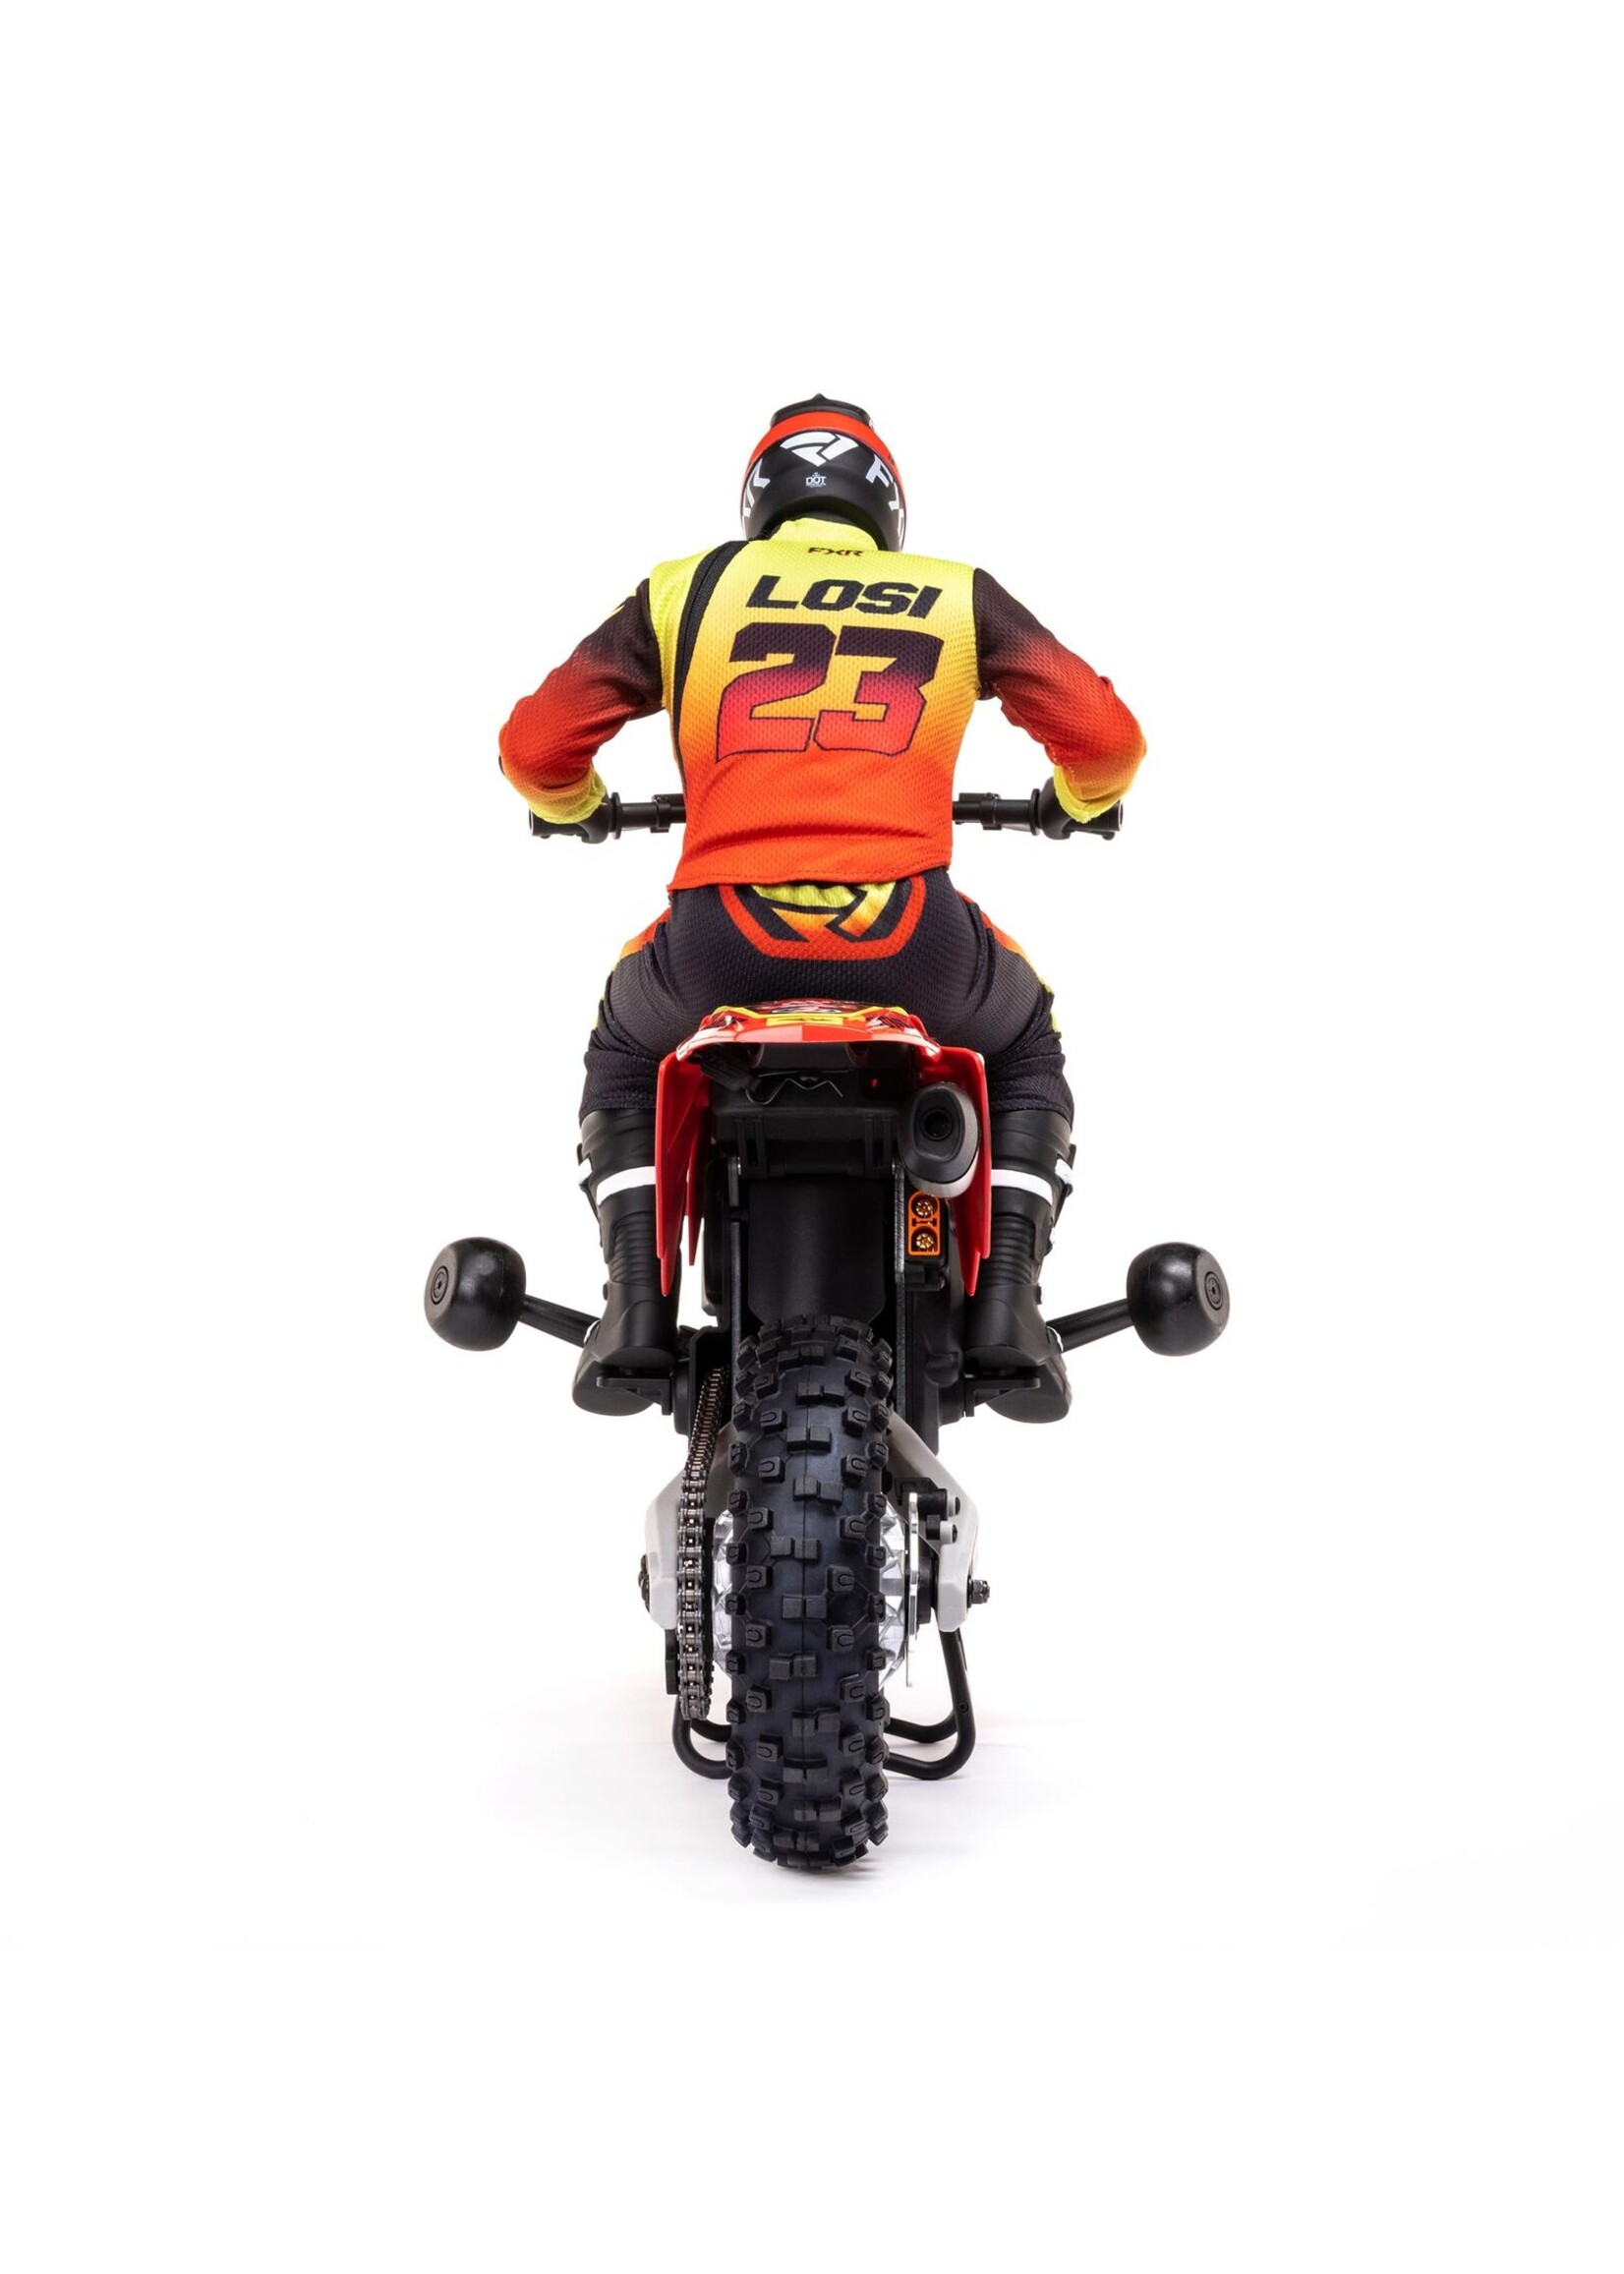 Losi LOS06000T1 - Promoto-MX FXR 1/4 Motorcycle, RTR - Red